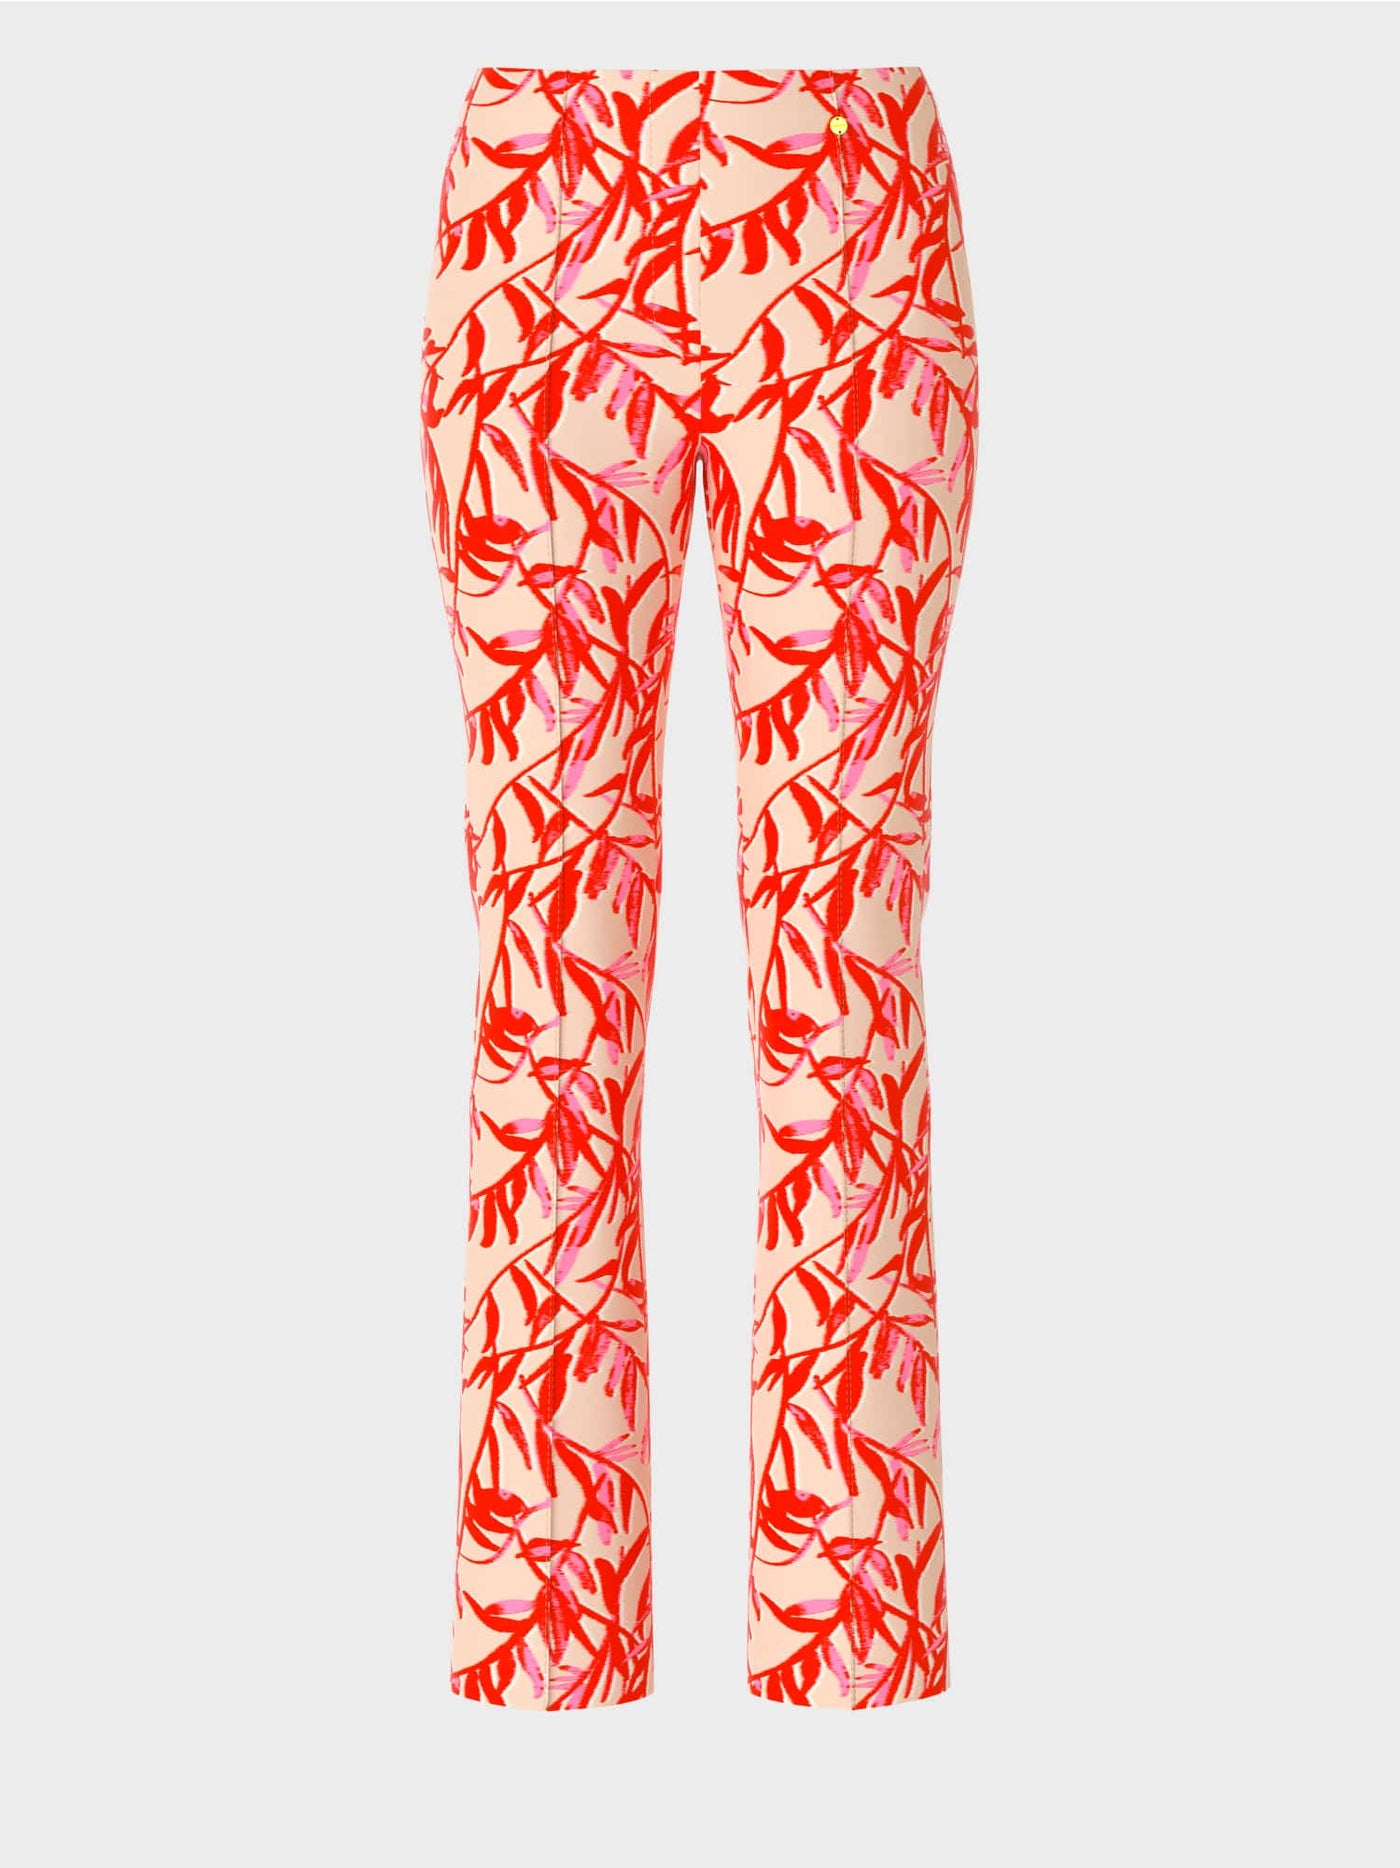 Pants in a floral print